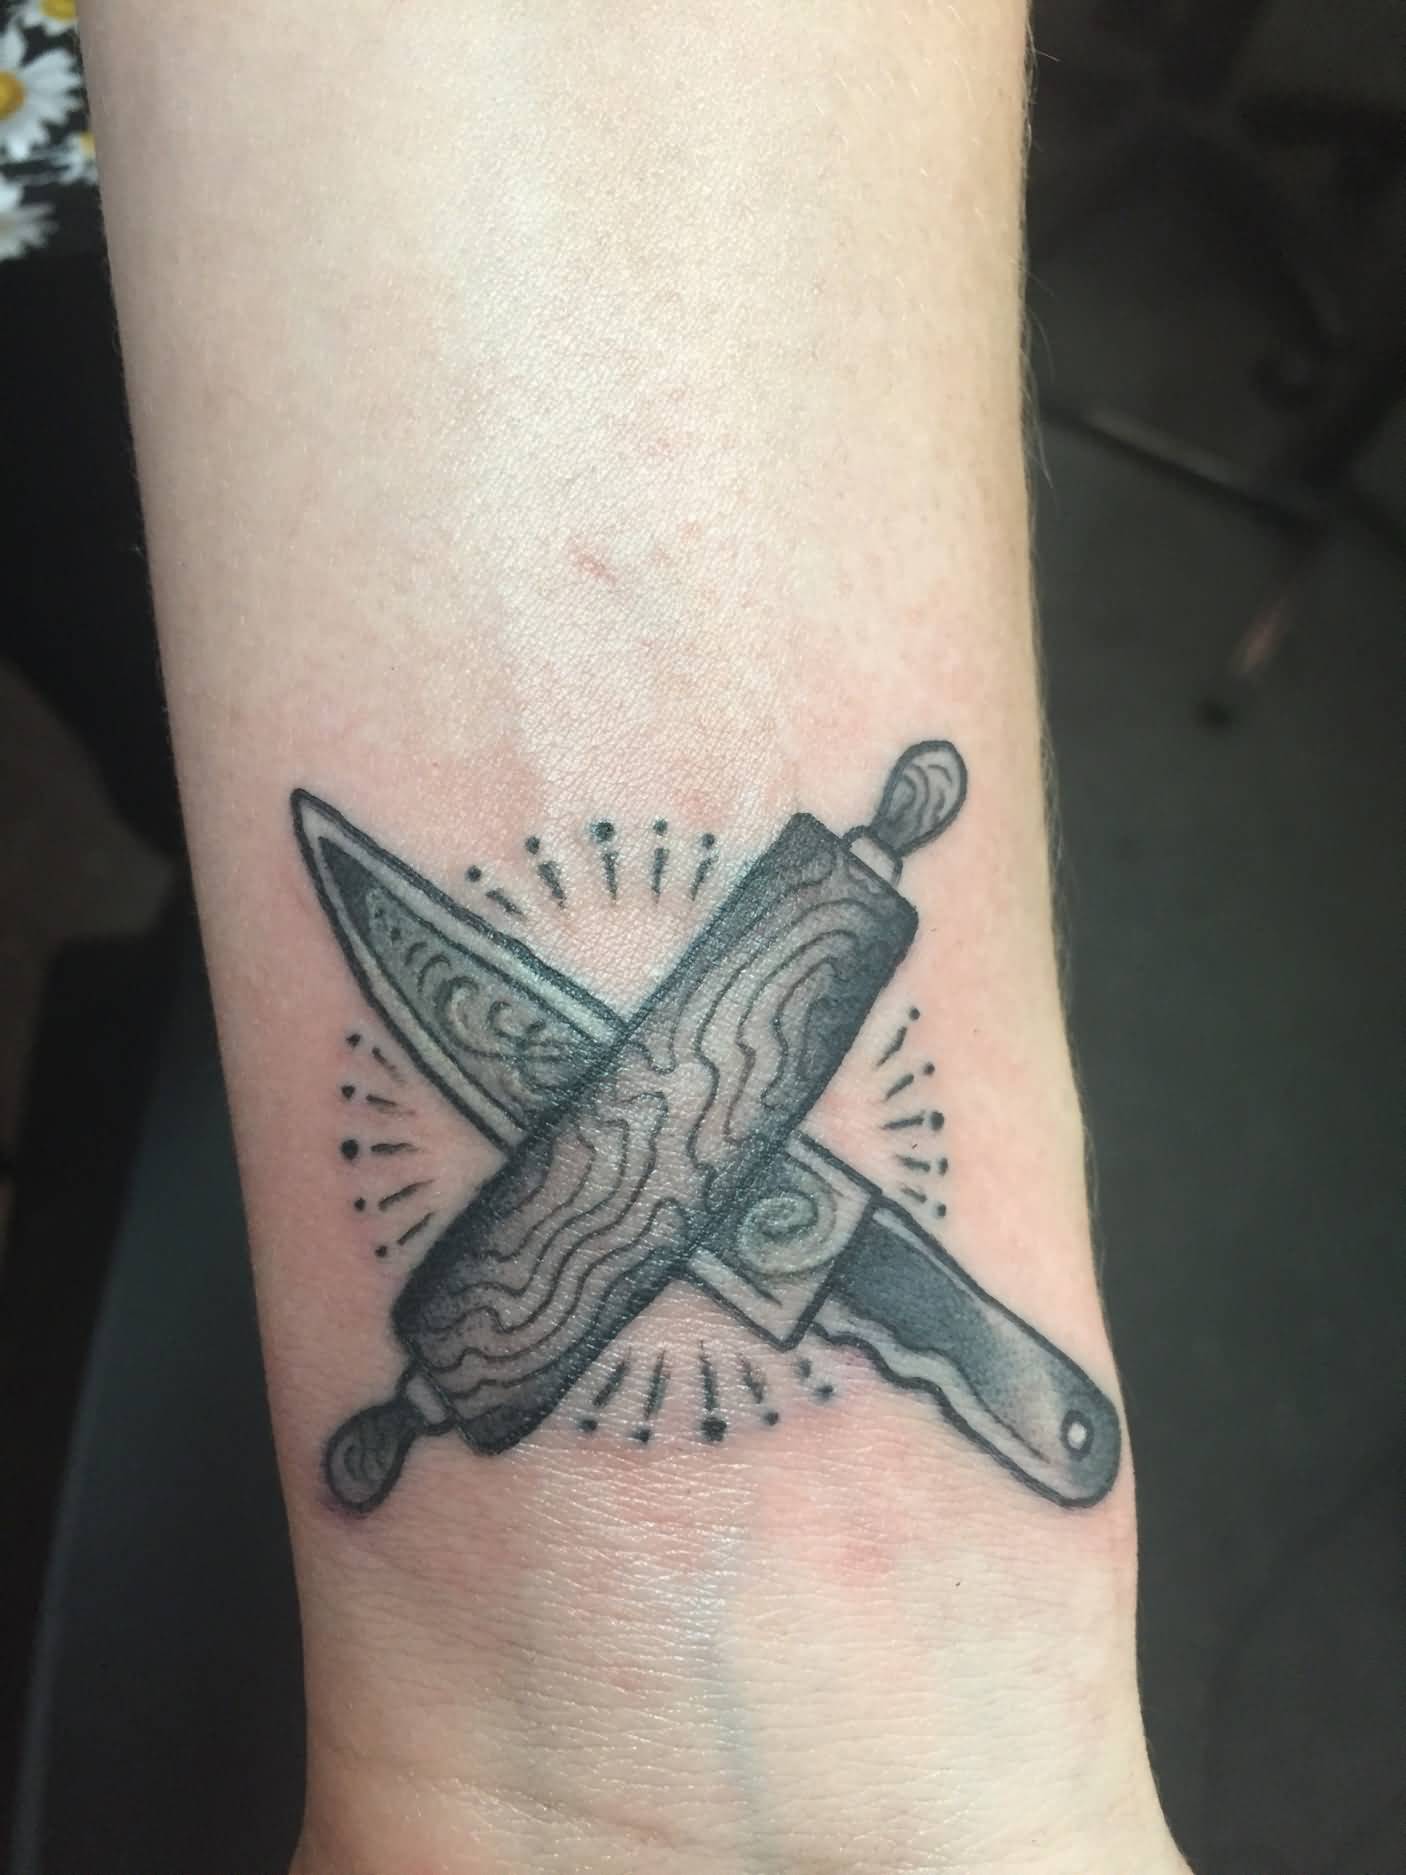 Small Knife With Rolling Pin Tattoo On Wrist